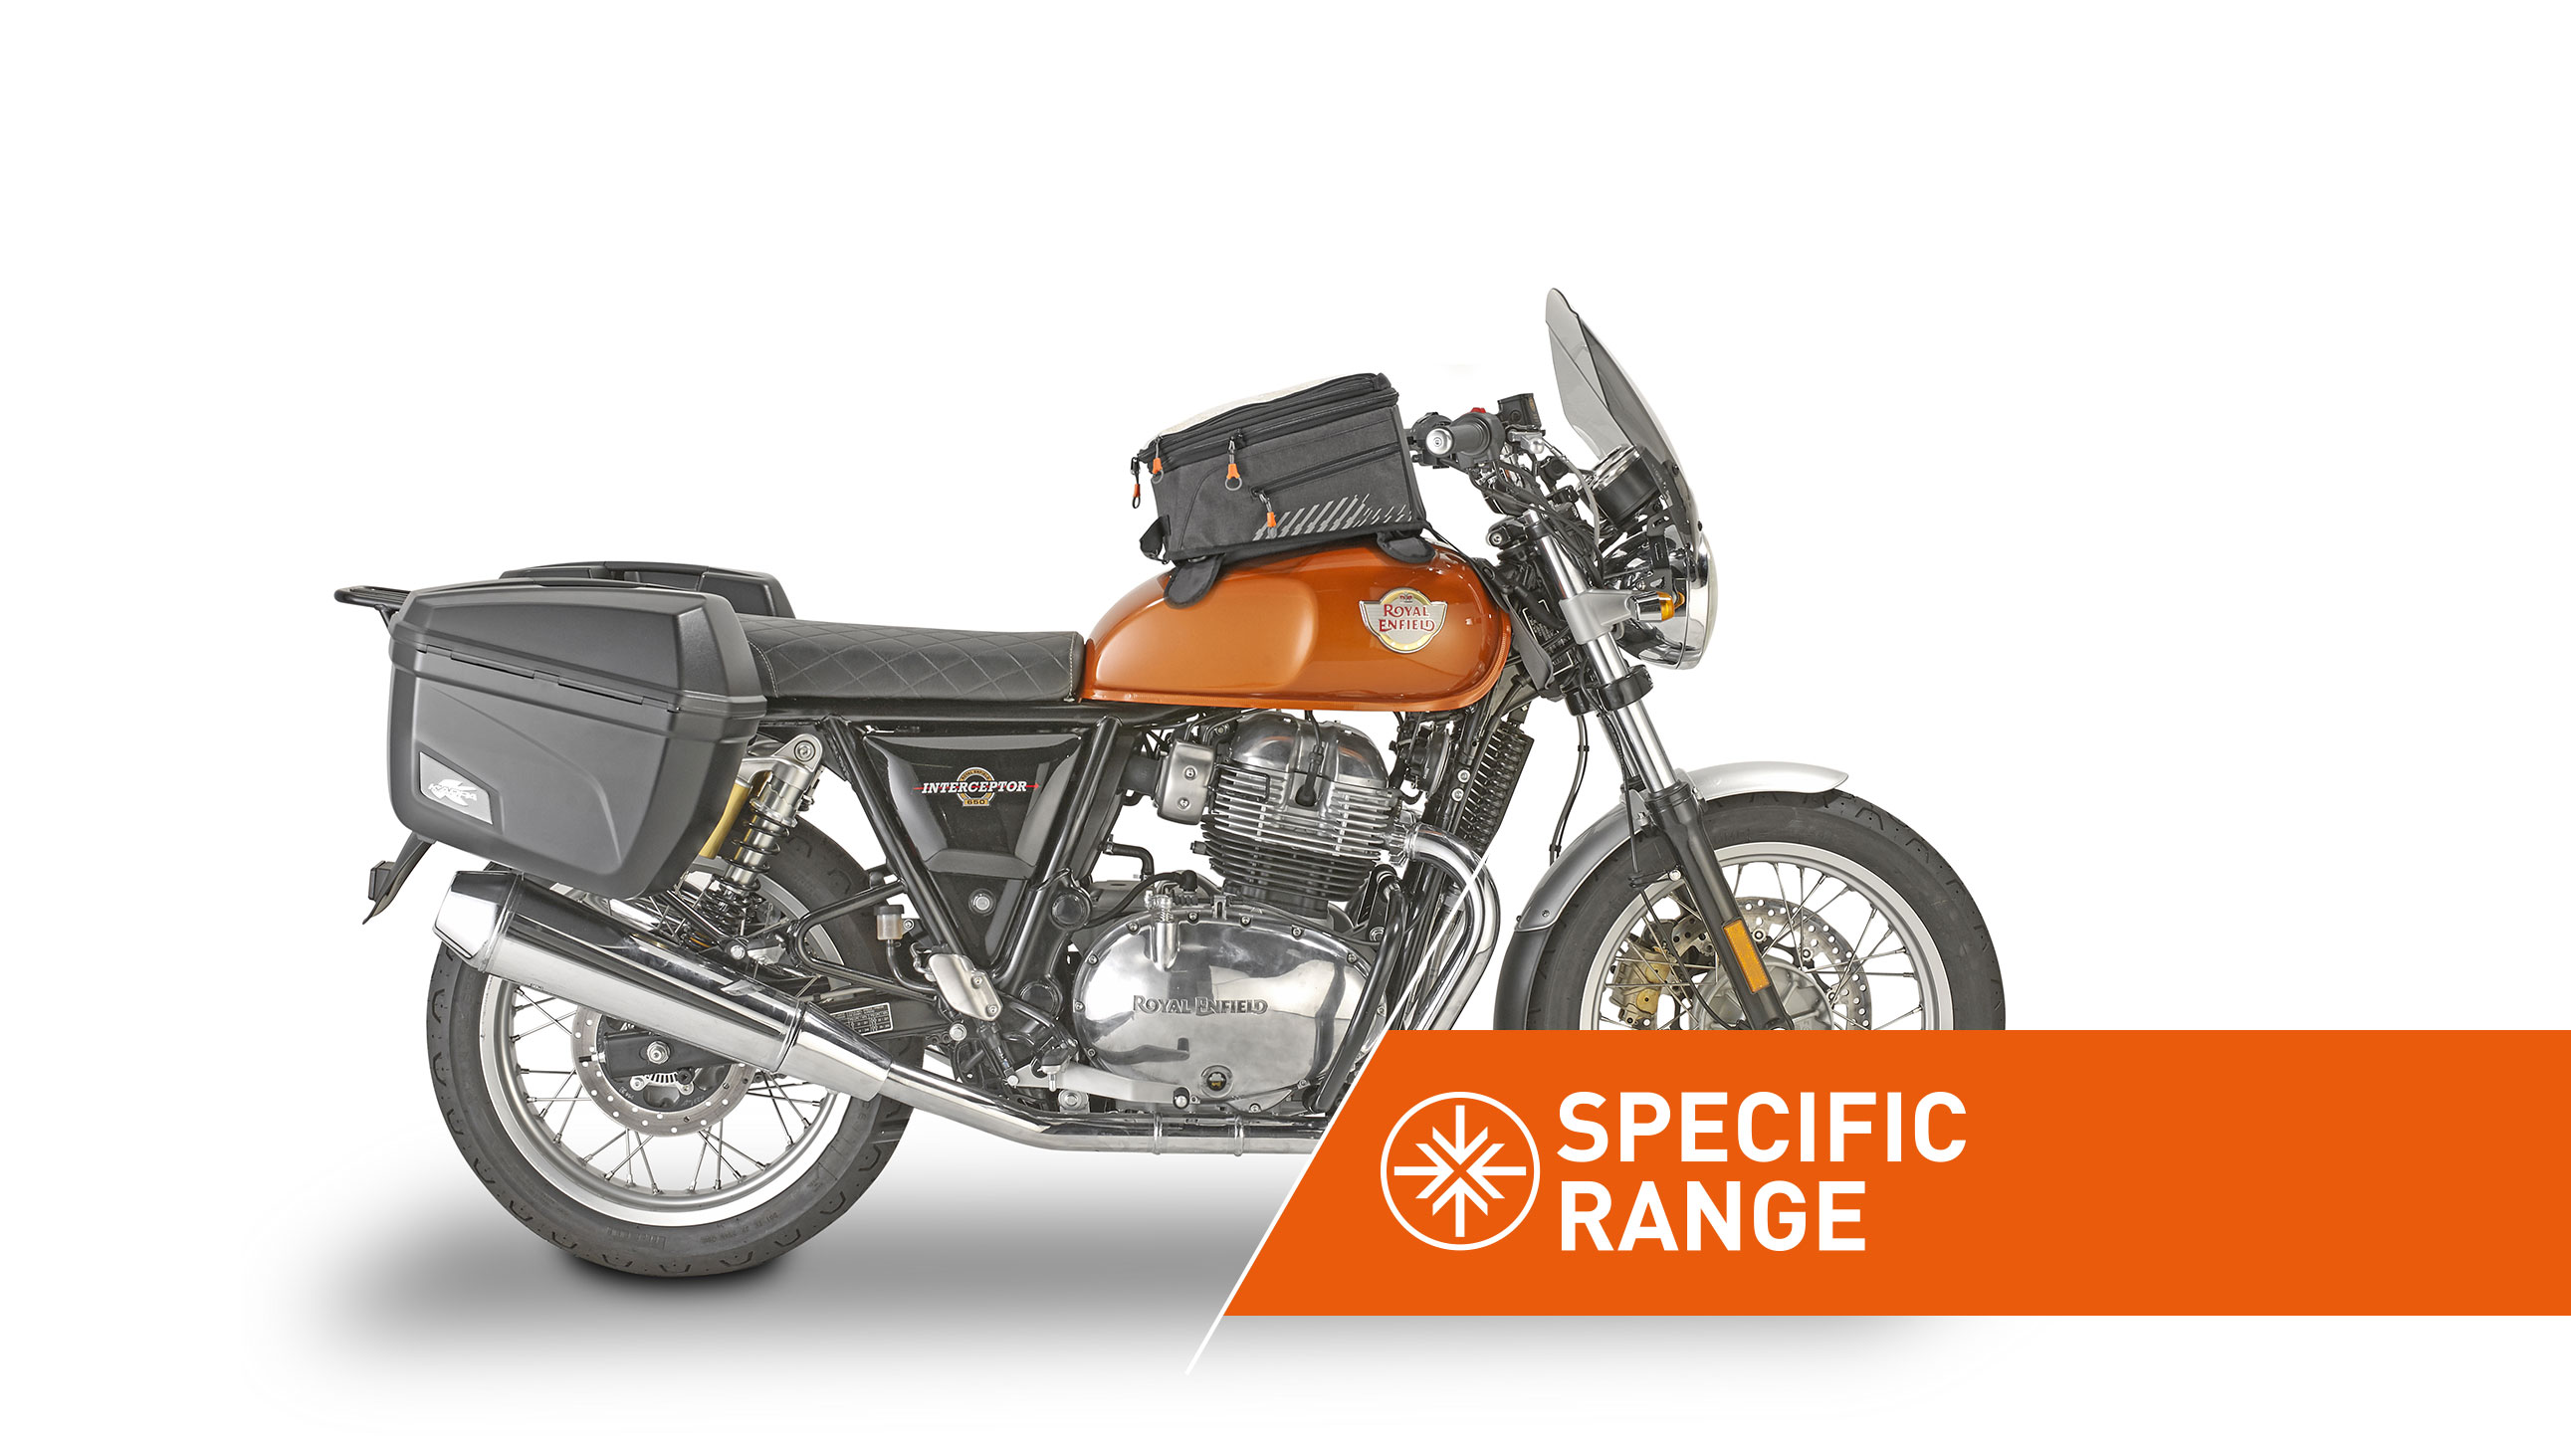 Specific range accessories for ROYAL ENFIELD INTERCEPTOR 650 by KAPPA MOTO